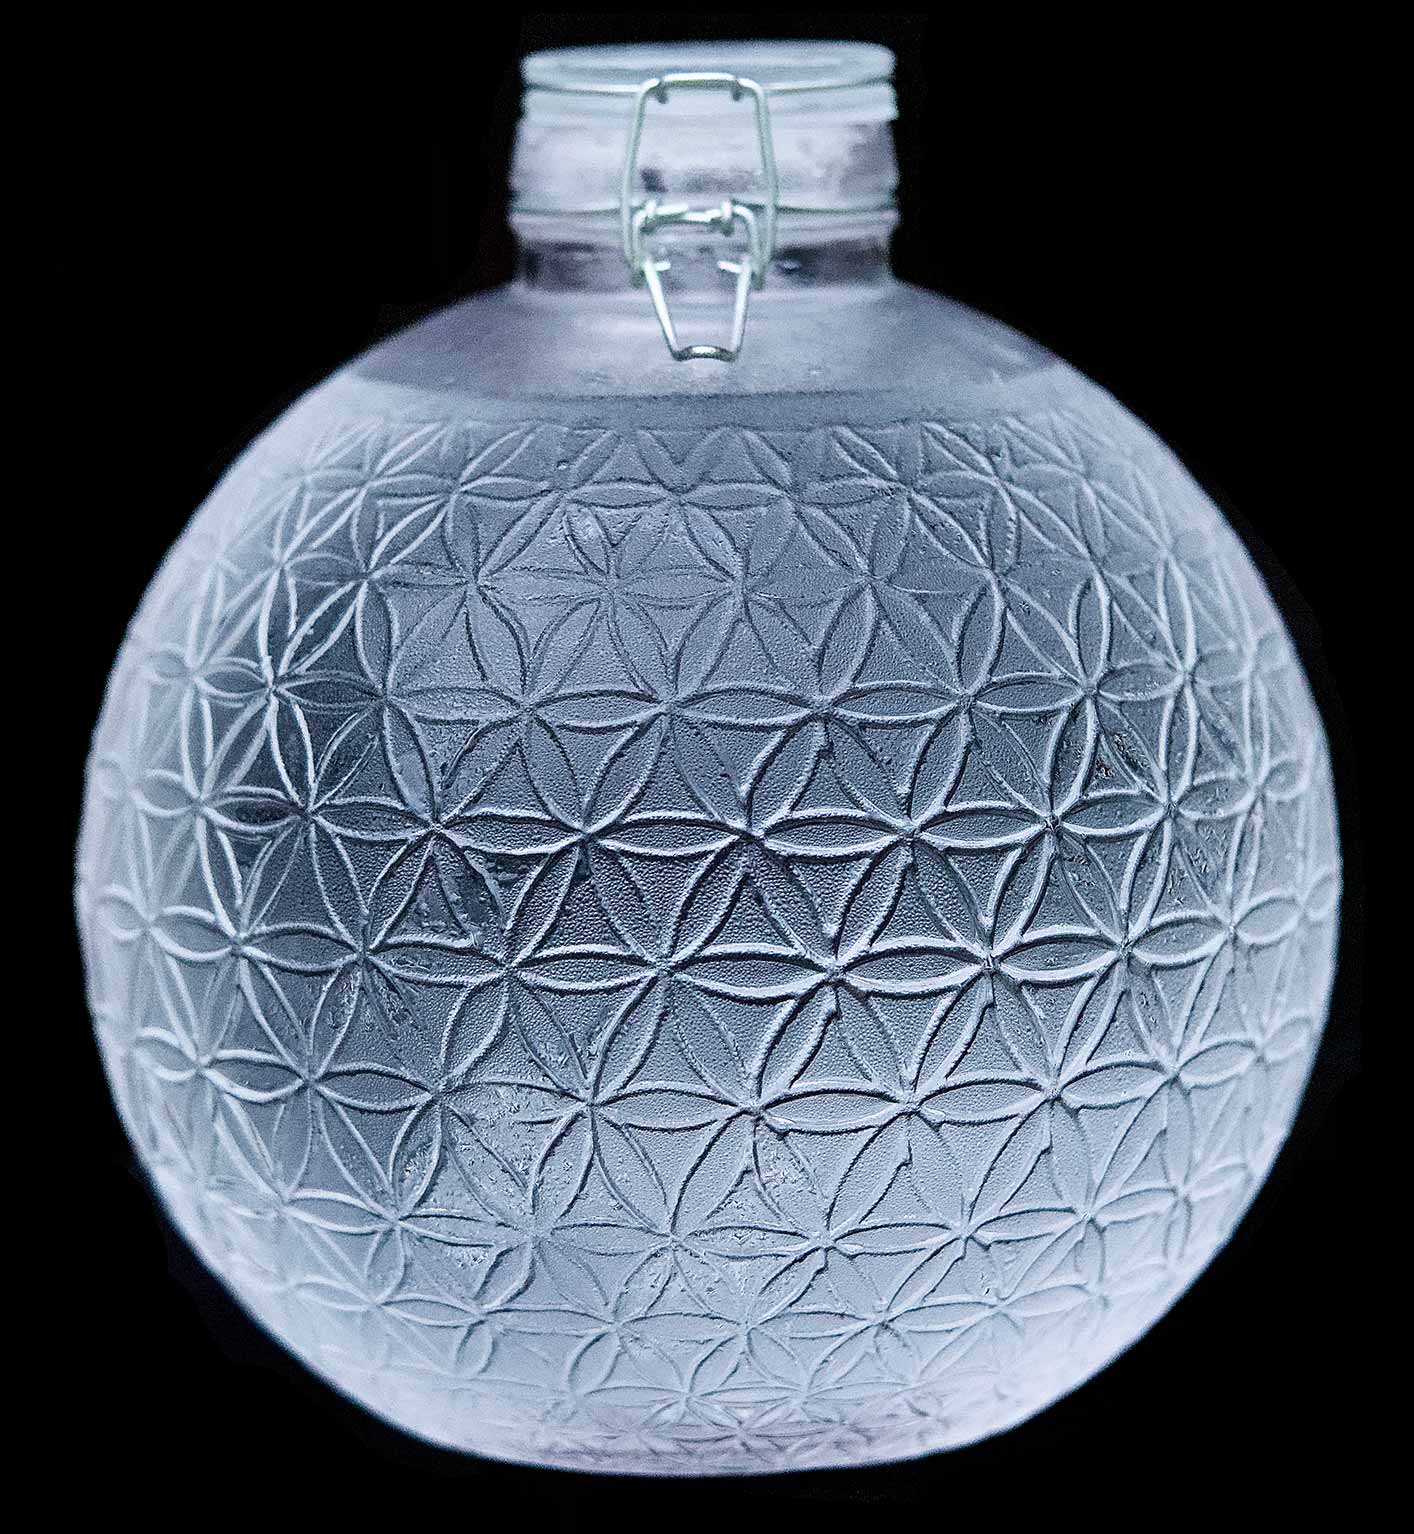 Italian glass 1 gallon water globe from Alive Water - Non-toxic steps